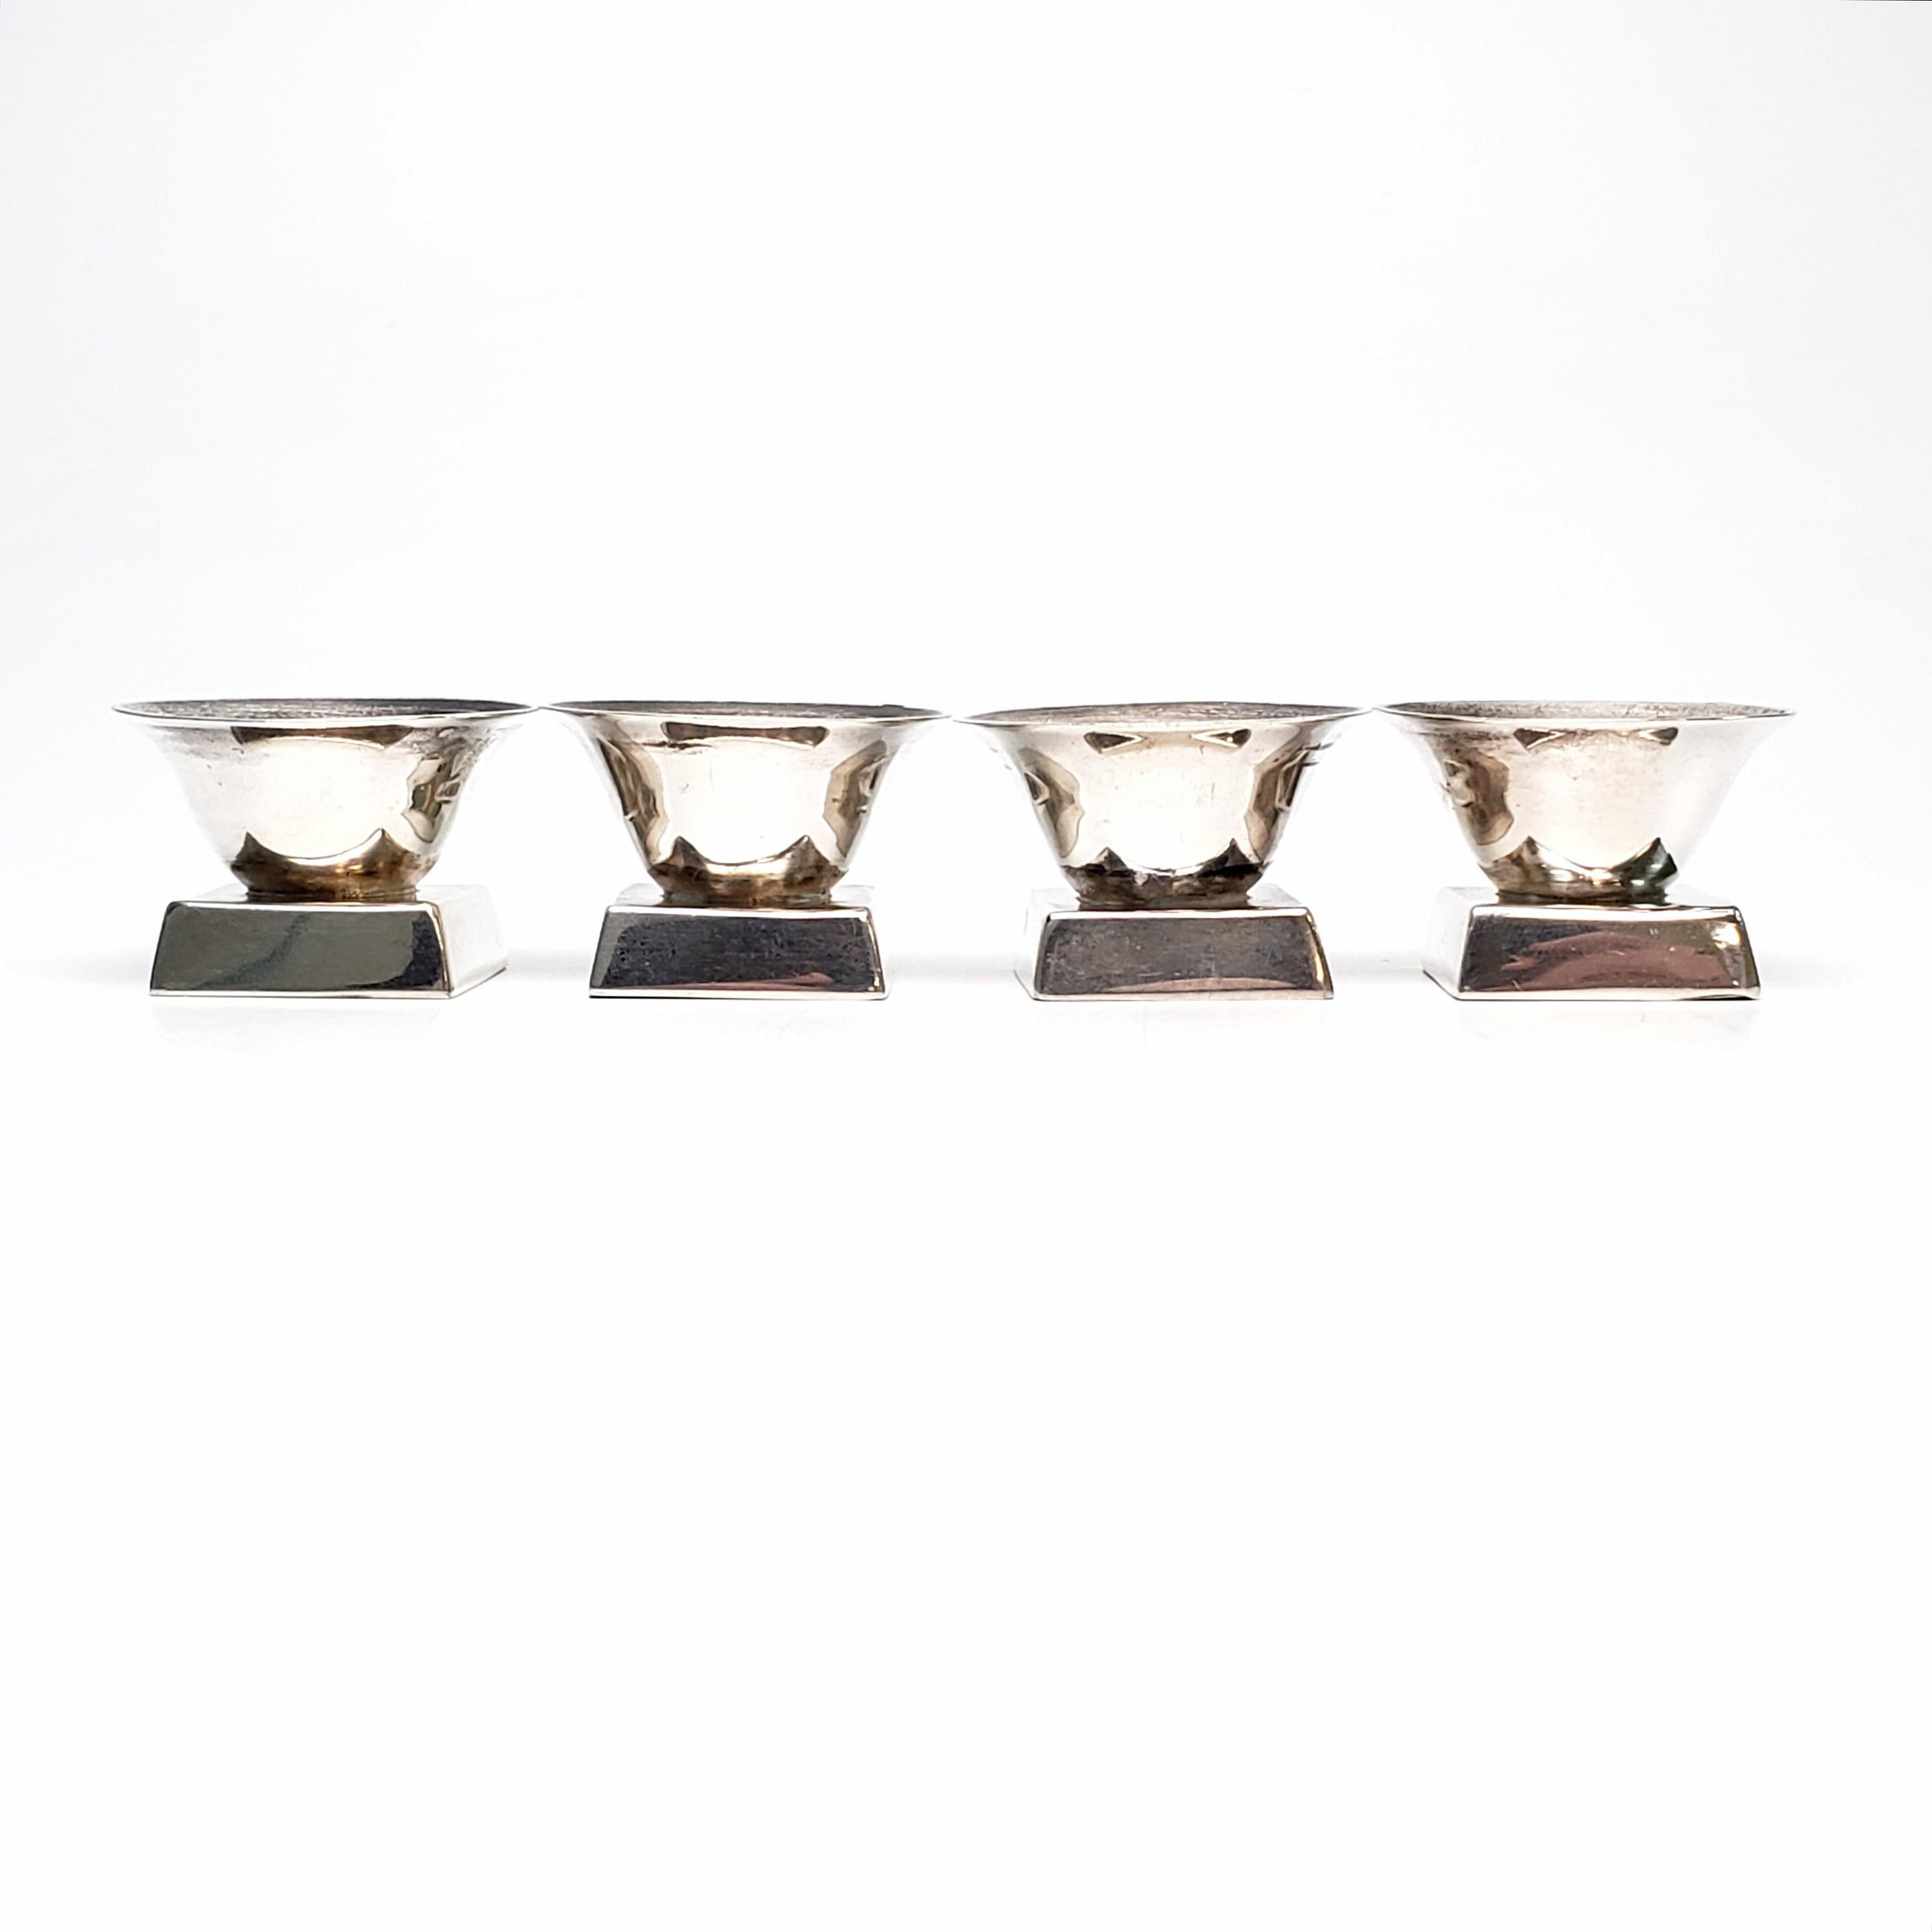 Unknown Set of 4 Taxco Mexico William Spratling Sterling Silver Salt Cellars, No Spoon